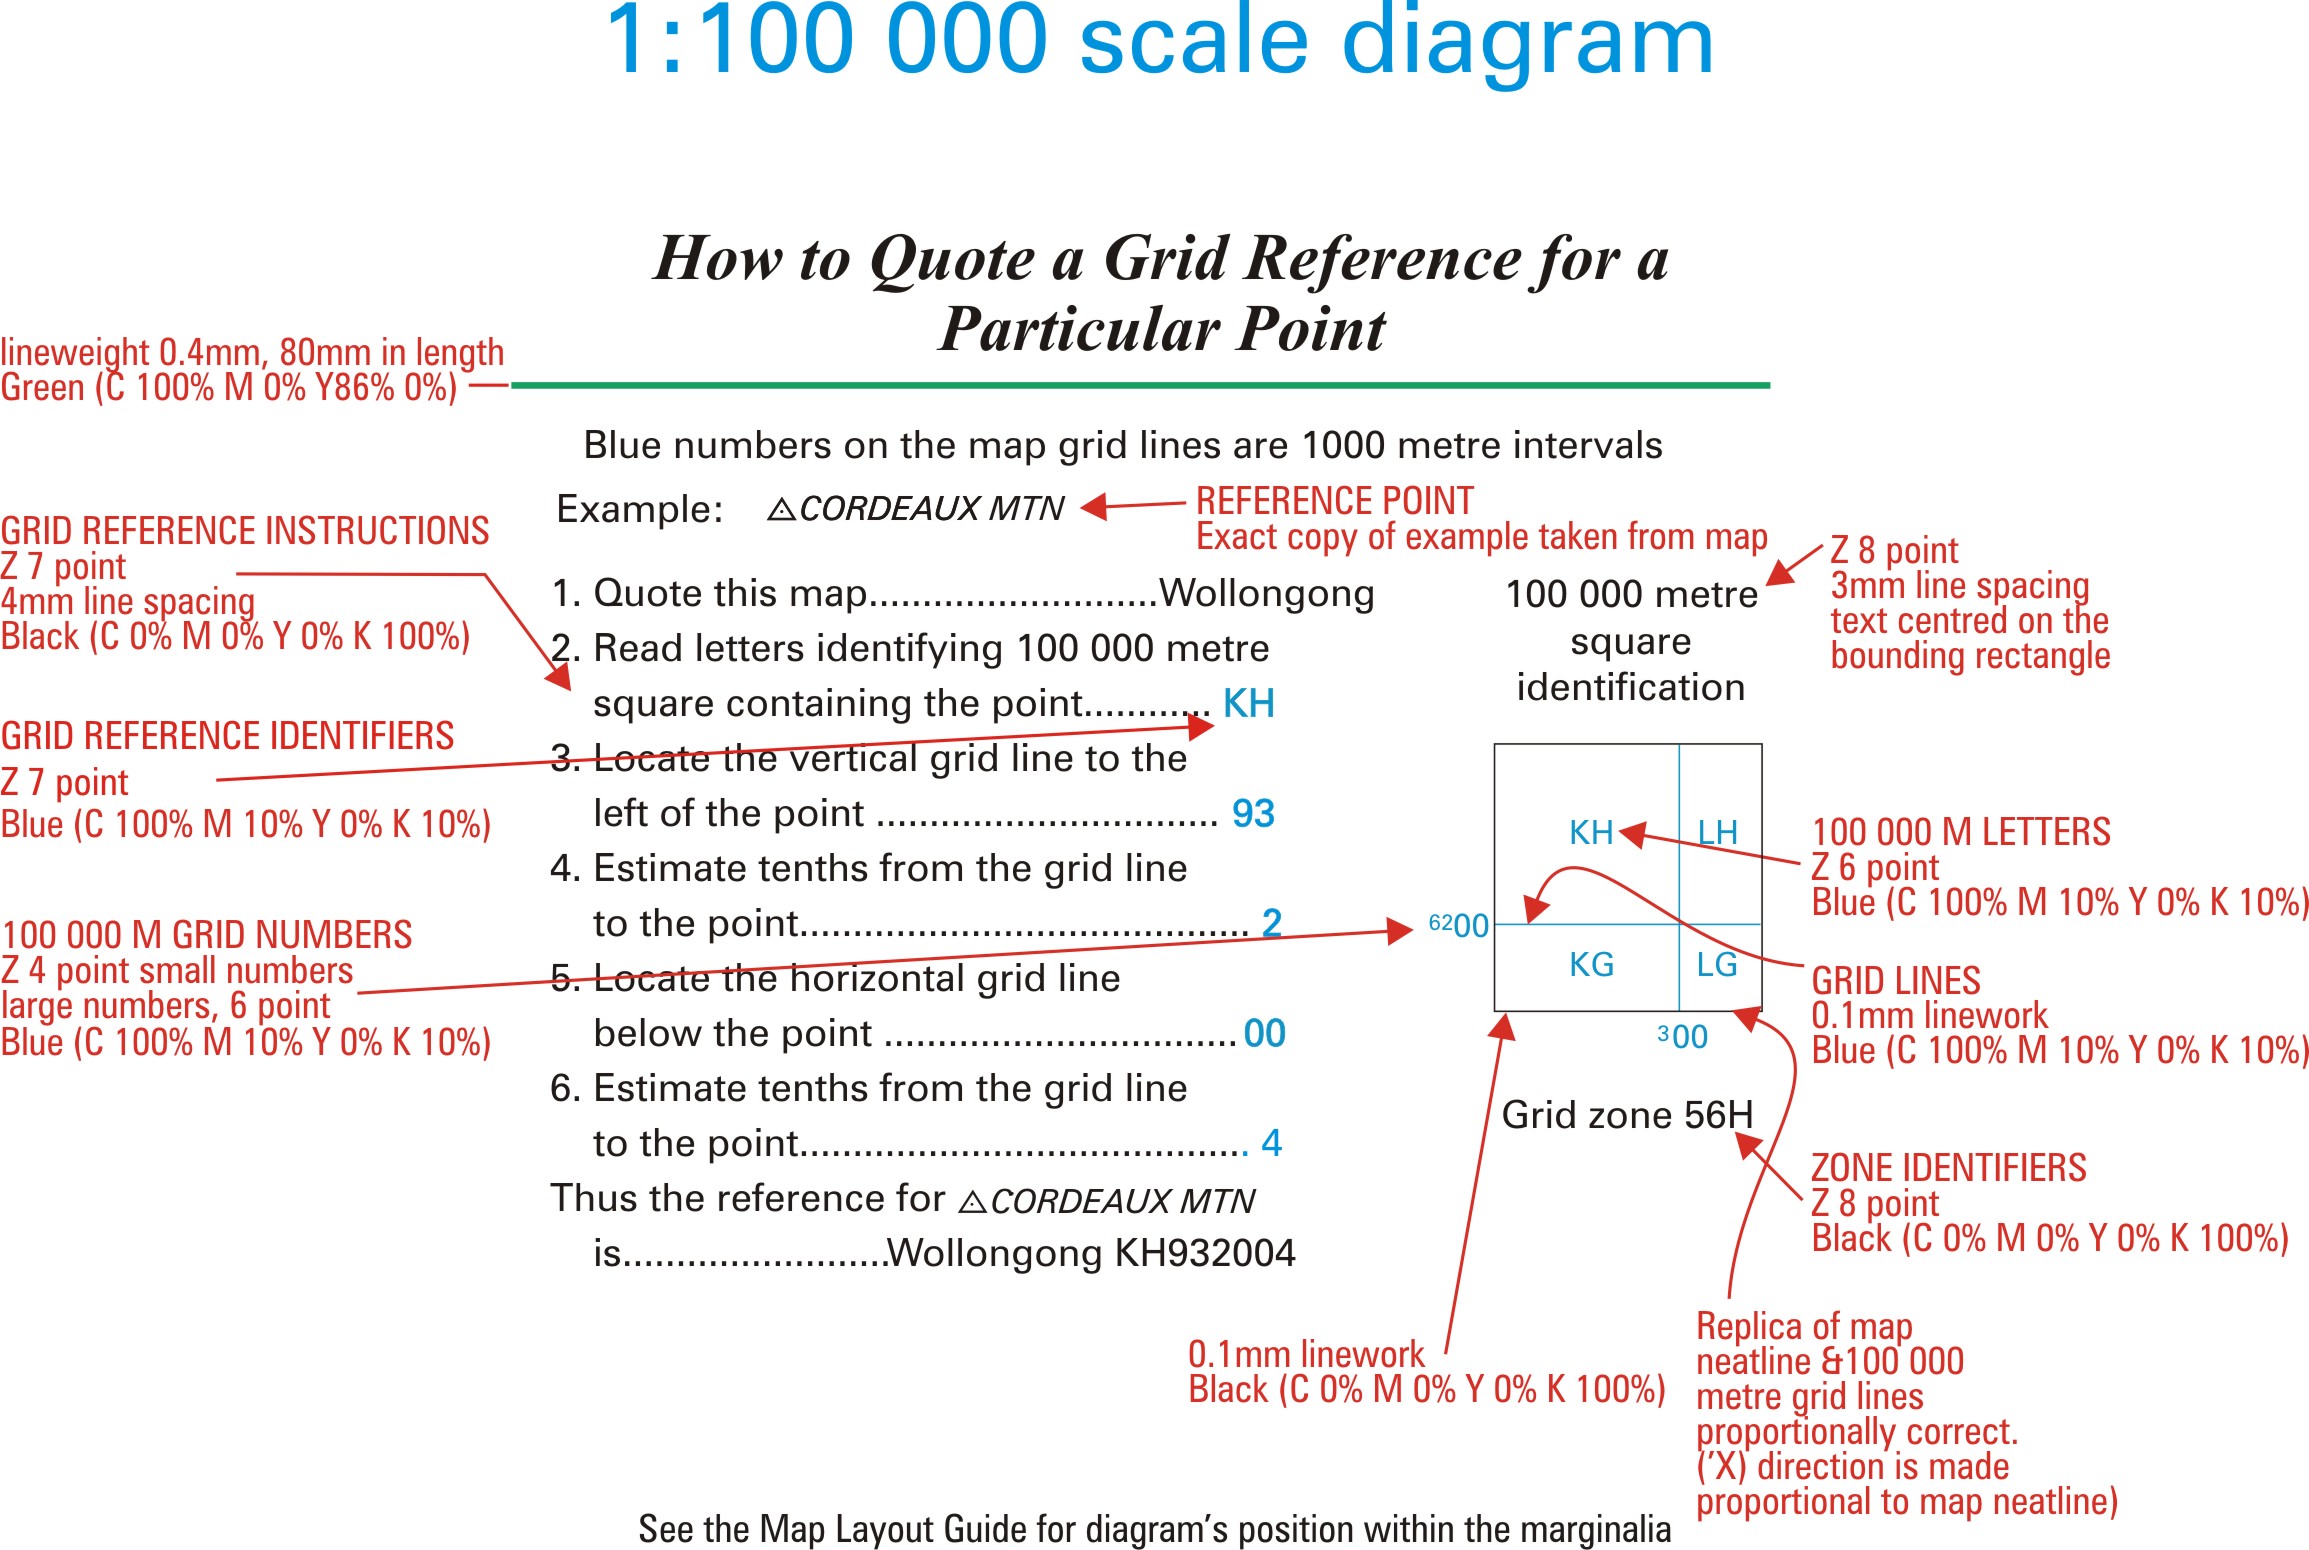 Grid Reference Diagram for 1:100 000